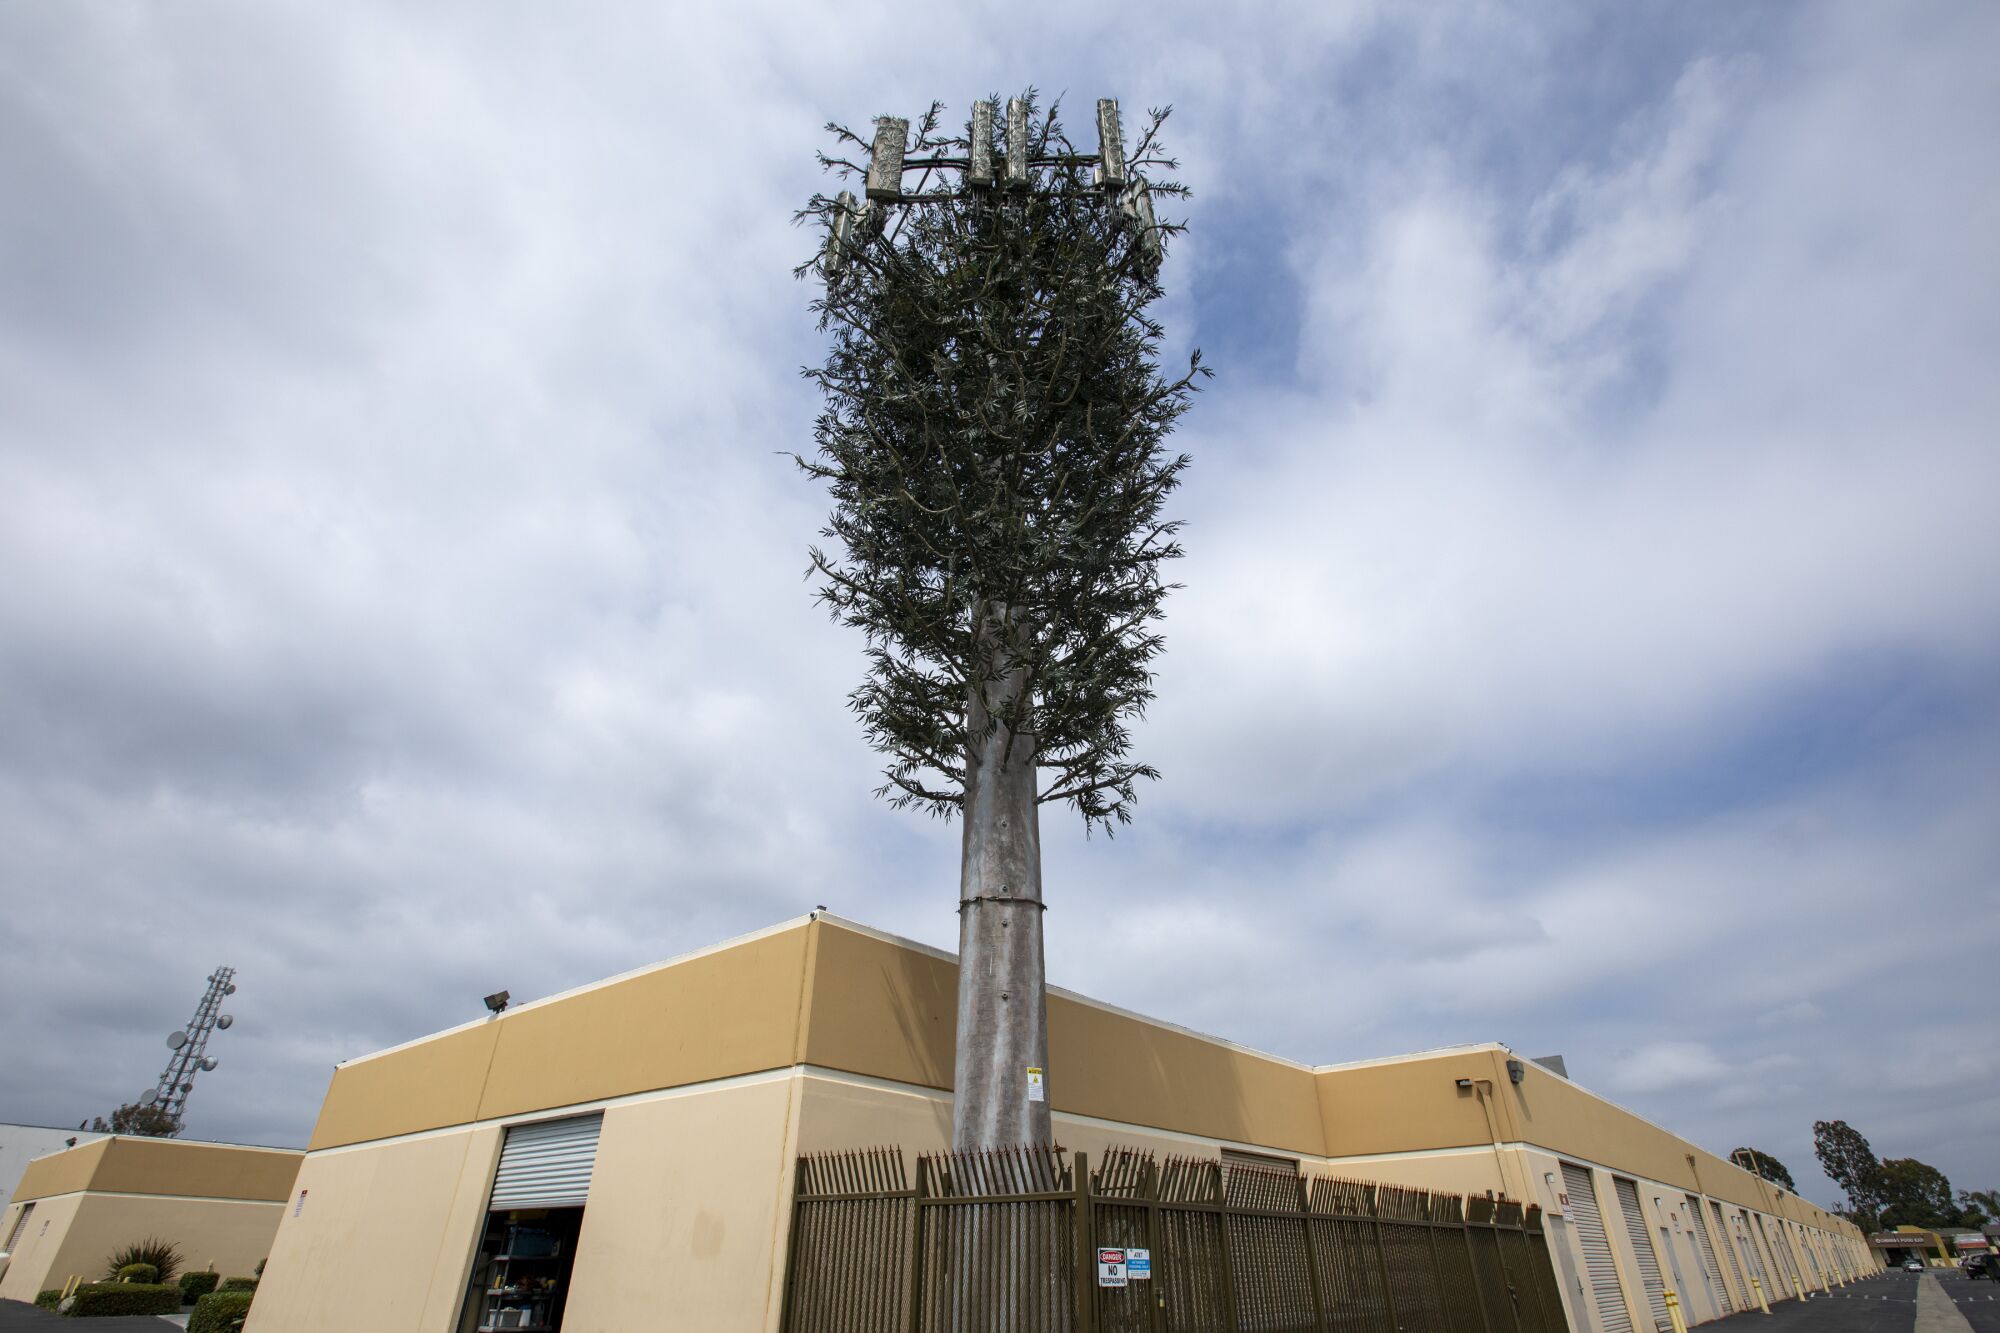 5g tower tree disguise